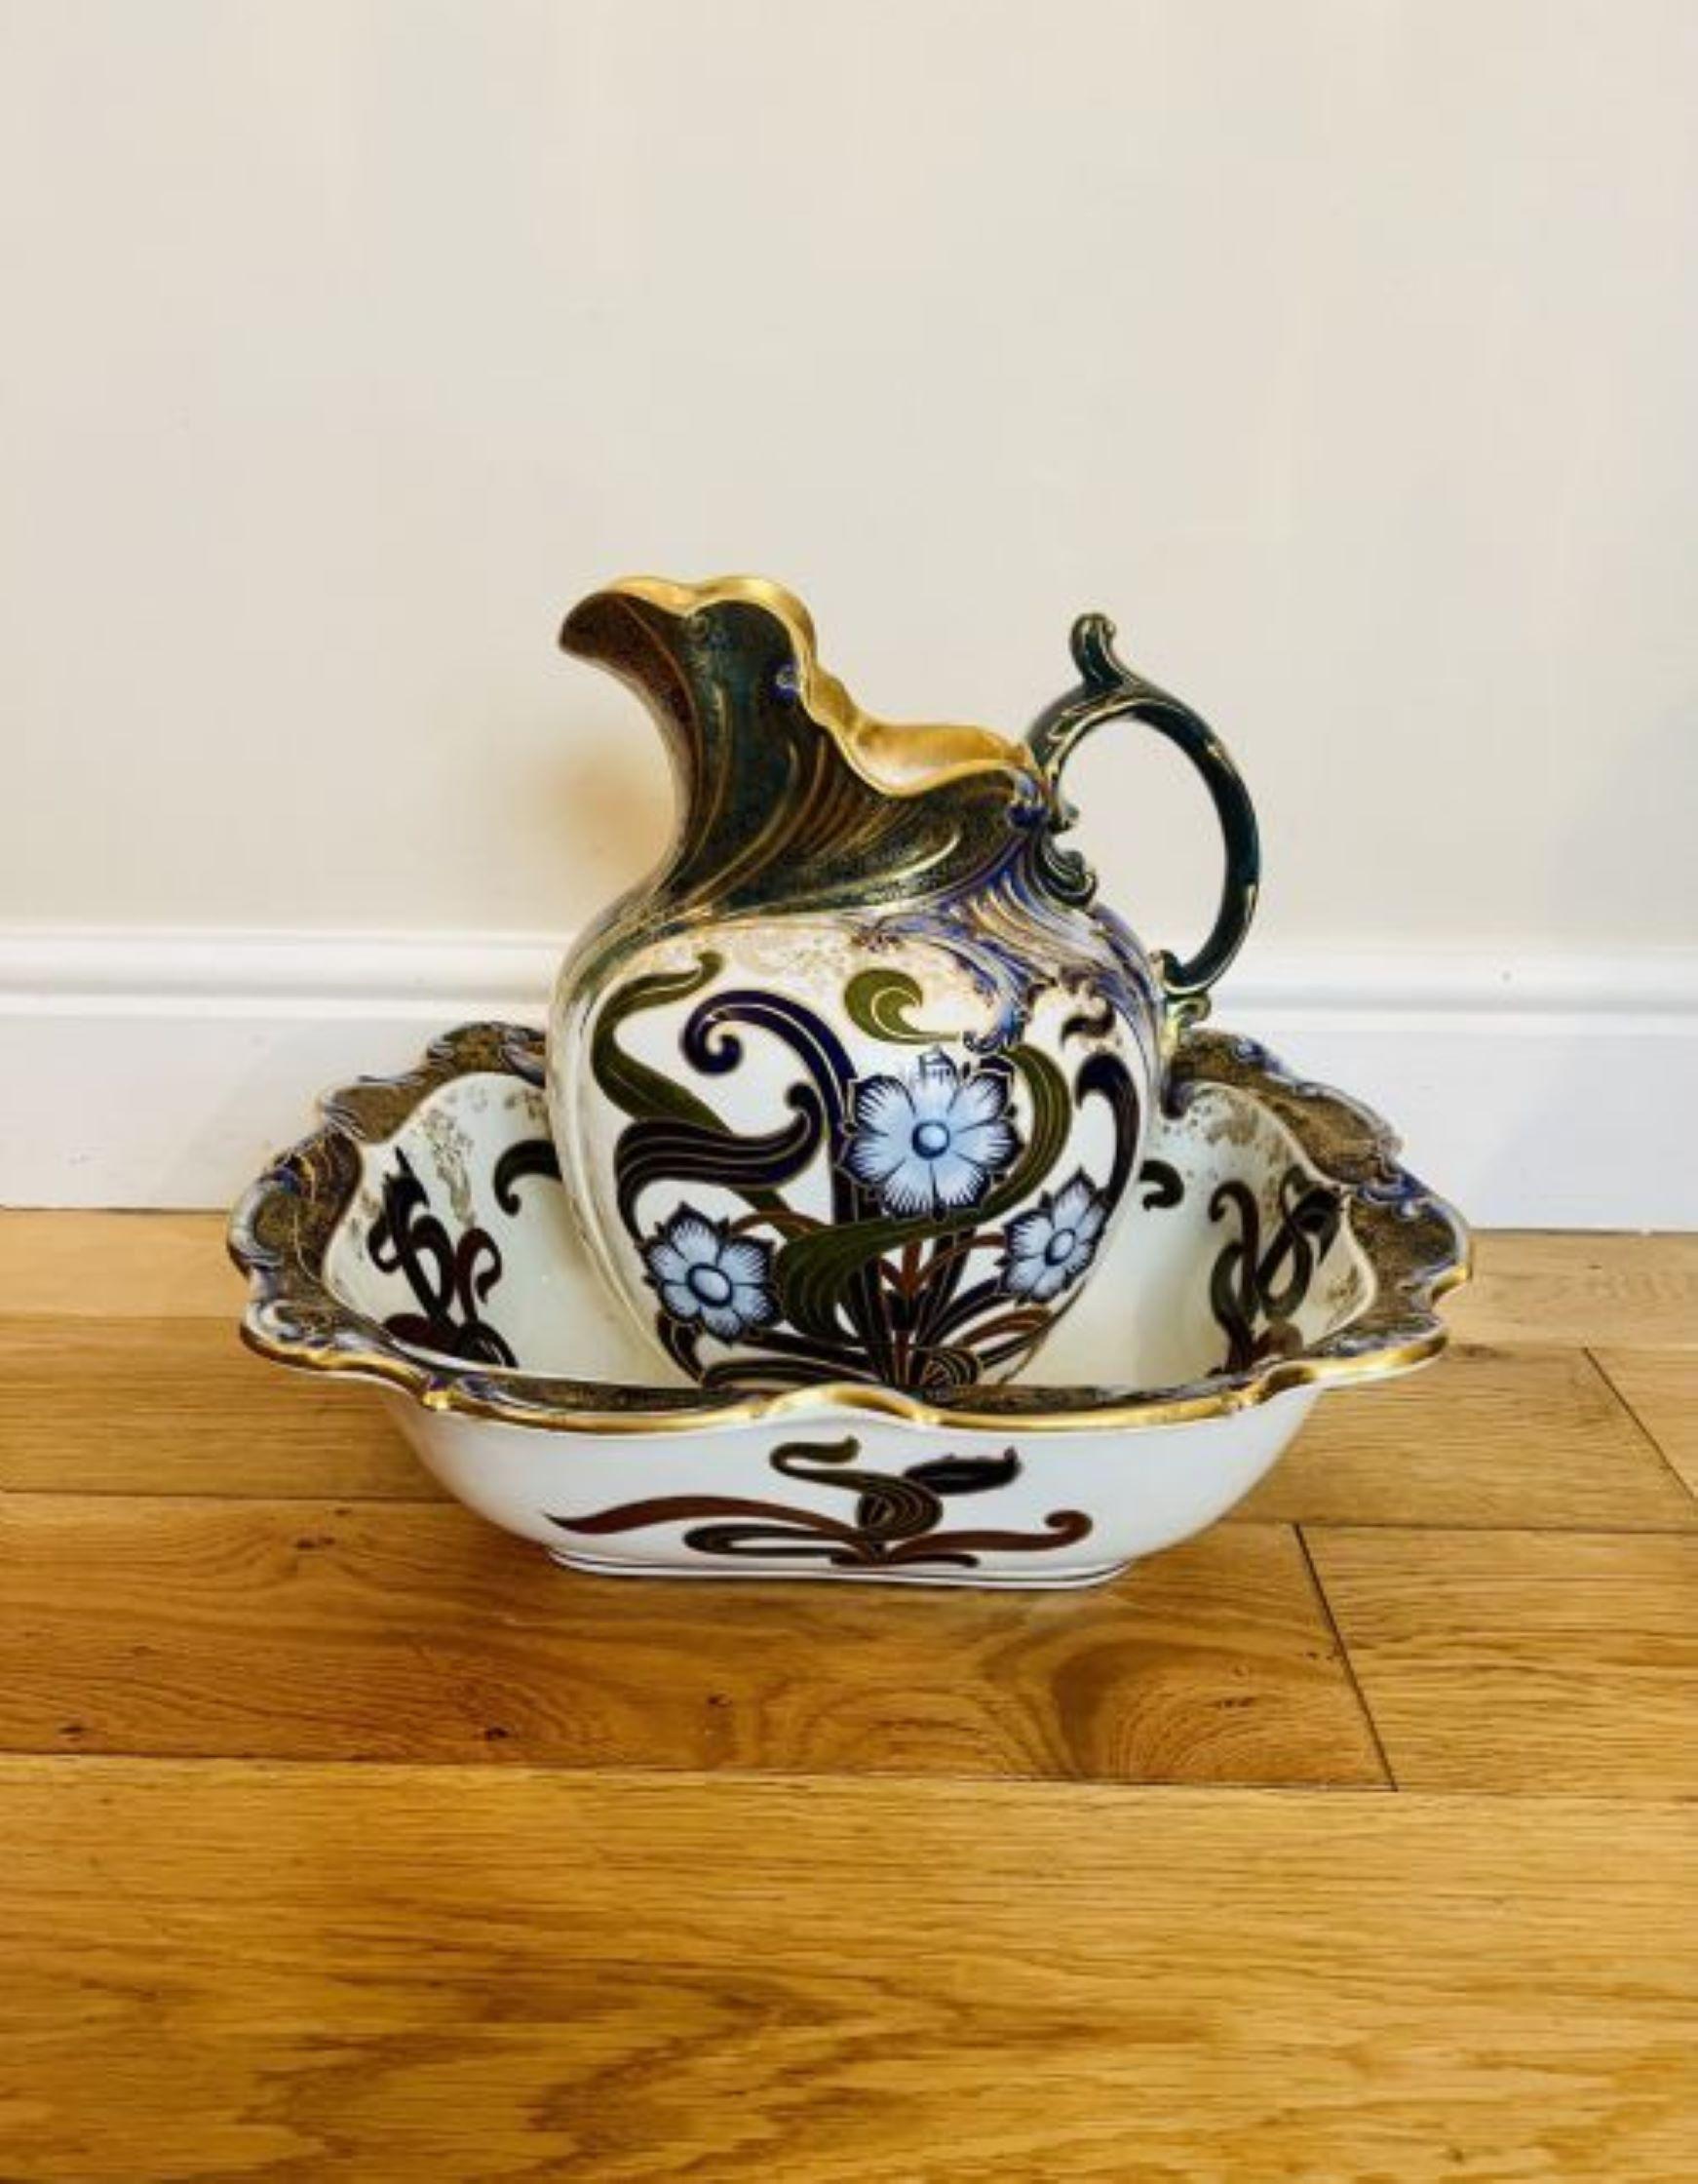 Rare pair of antique Victorian quality Doulton Burslem jug & bowl set consisting of two large jugs, two large bowls, a soap dish, bowl and a vase with fantastic Art Nouveau decoration with stylised flowers and raised gold gilt and scroll boarders in